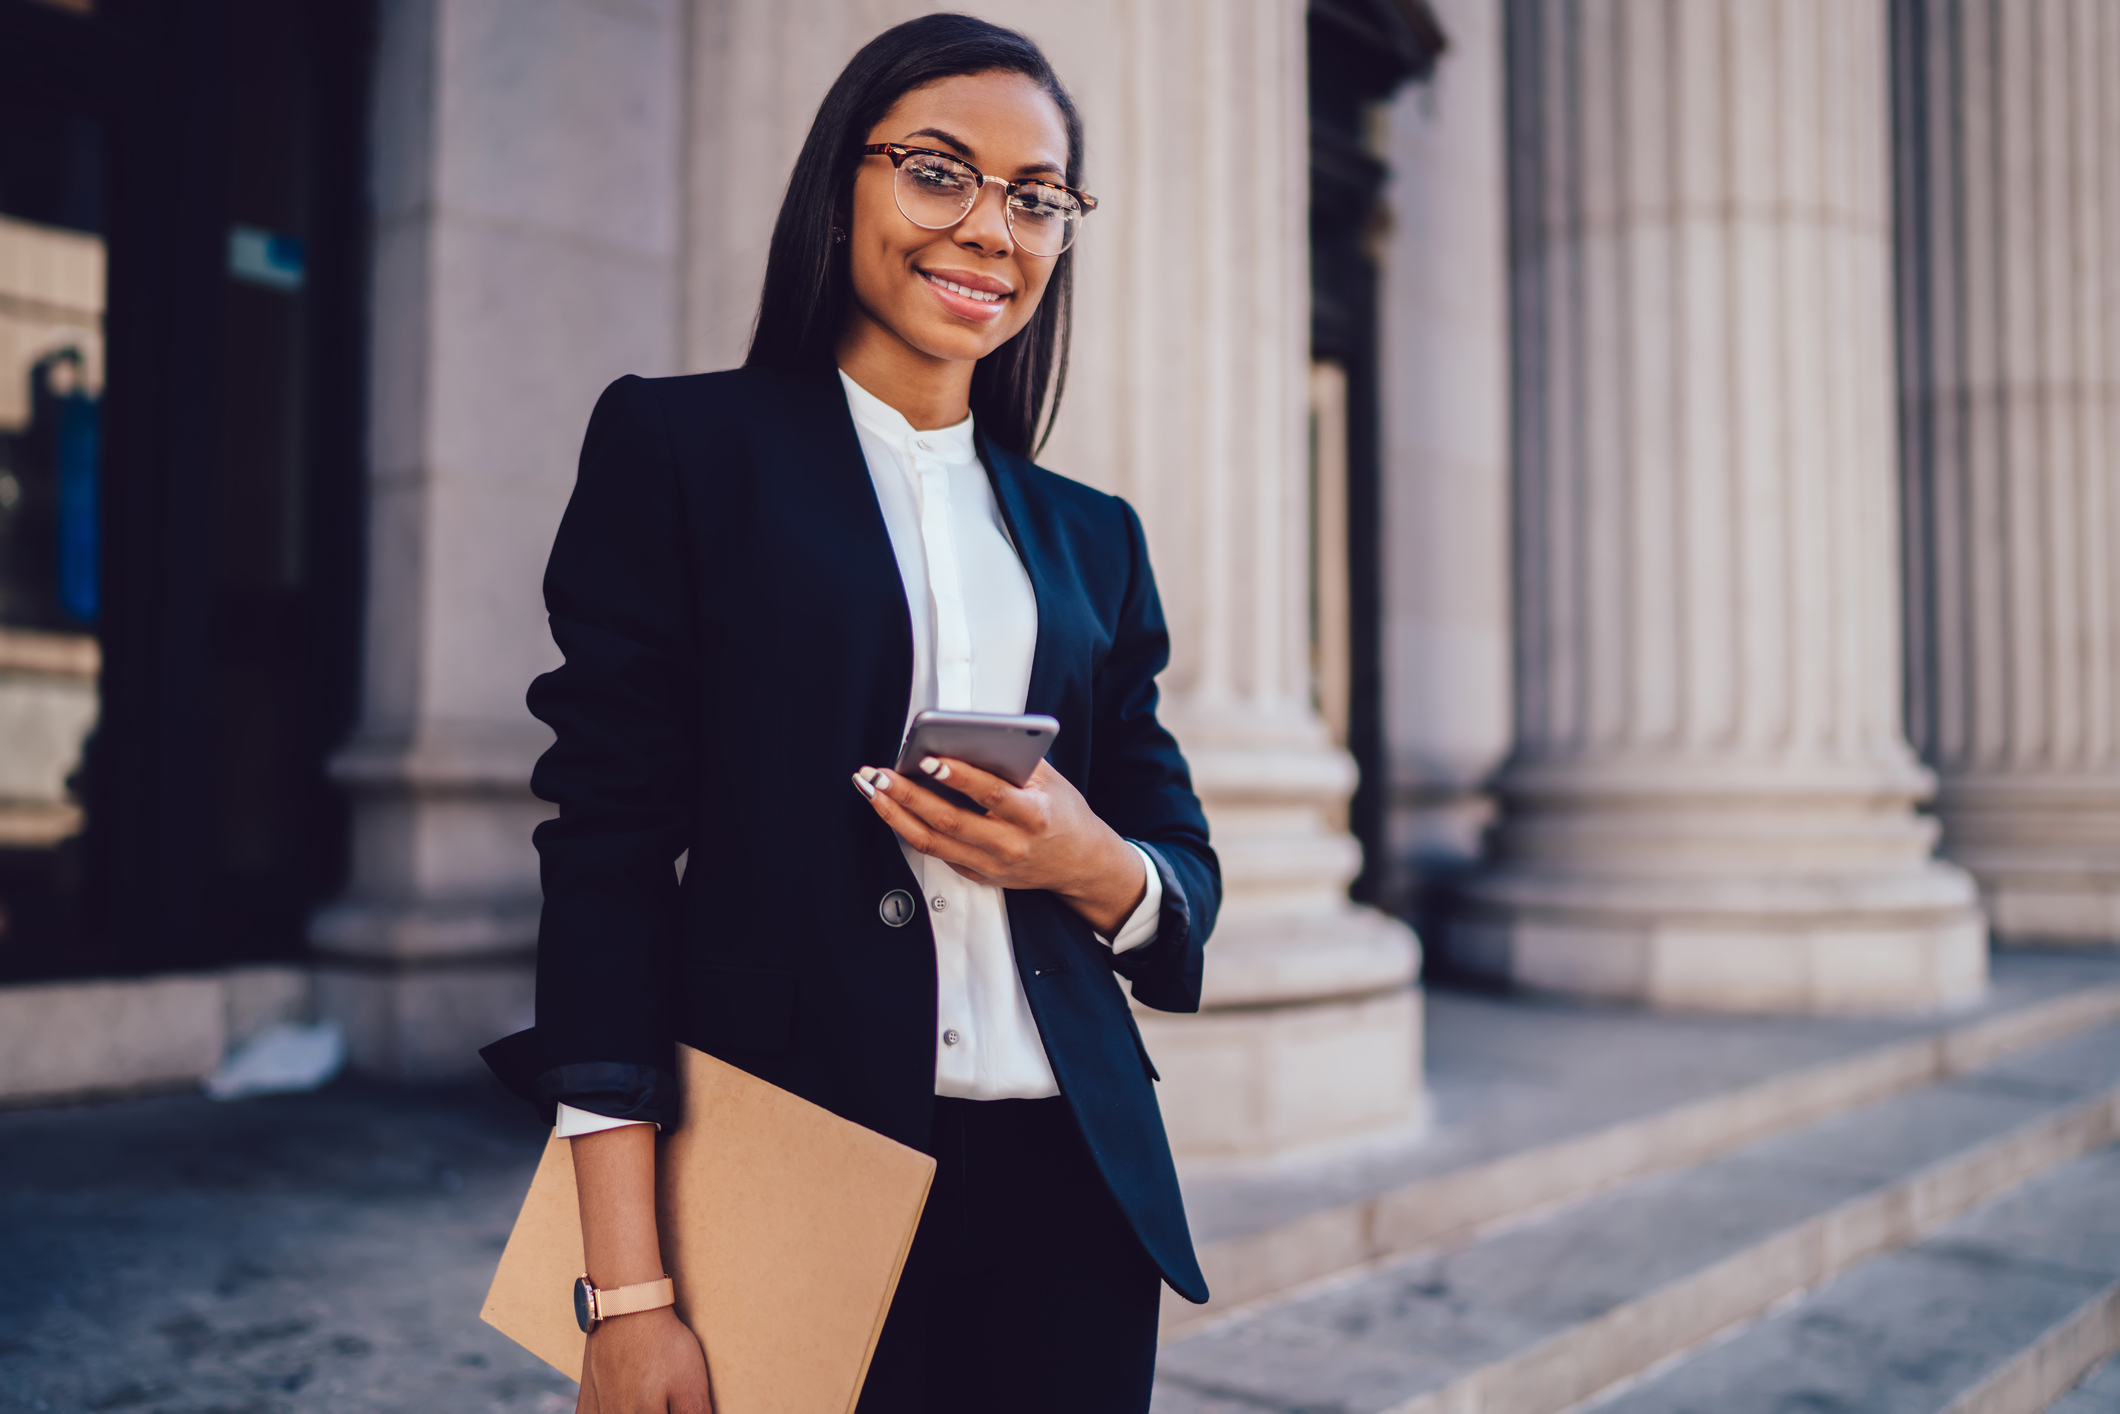 Young professional woman holding a folder and using a smartphone